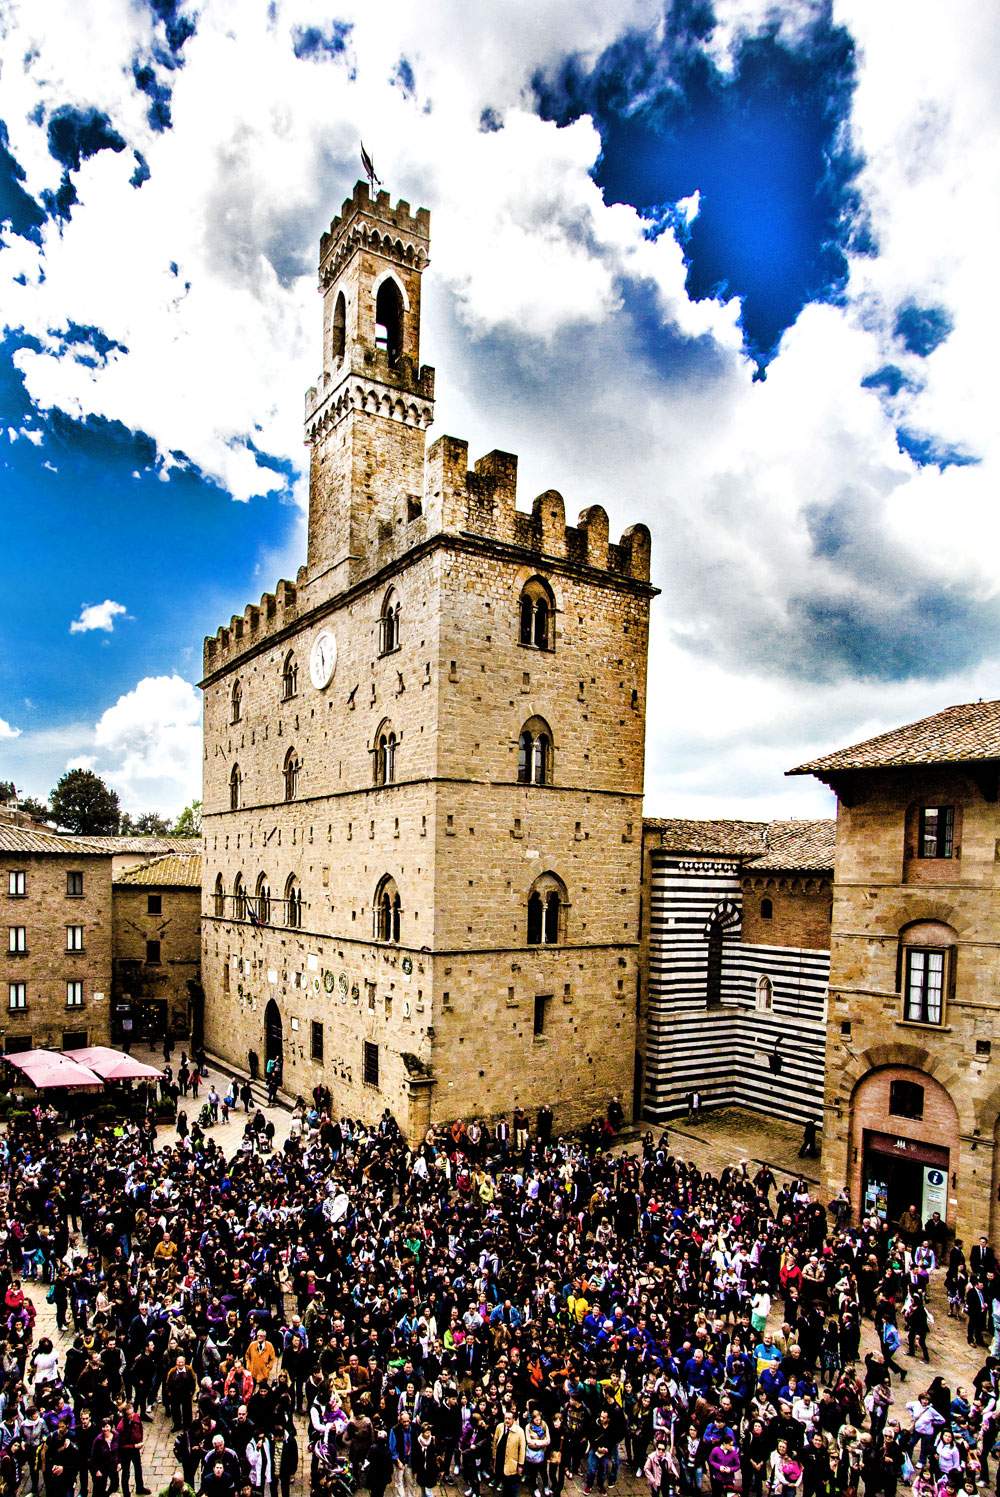 Young people true protagonists of change. Volterra, a candidate for Capital of Culture 2021, launches a call